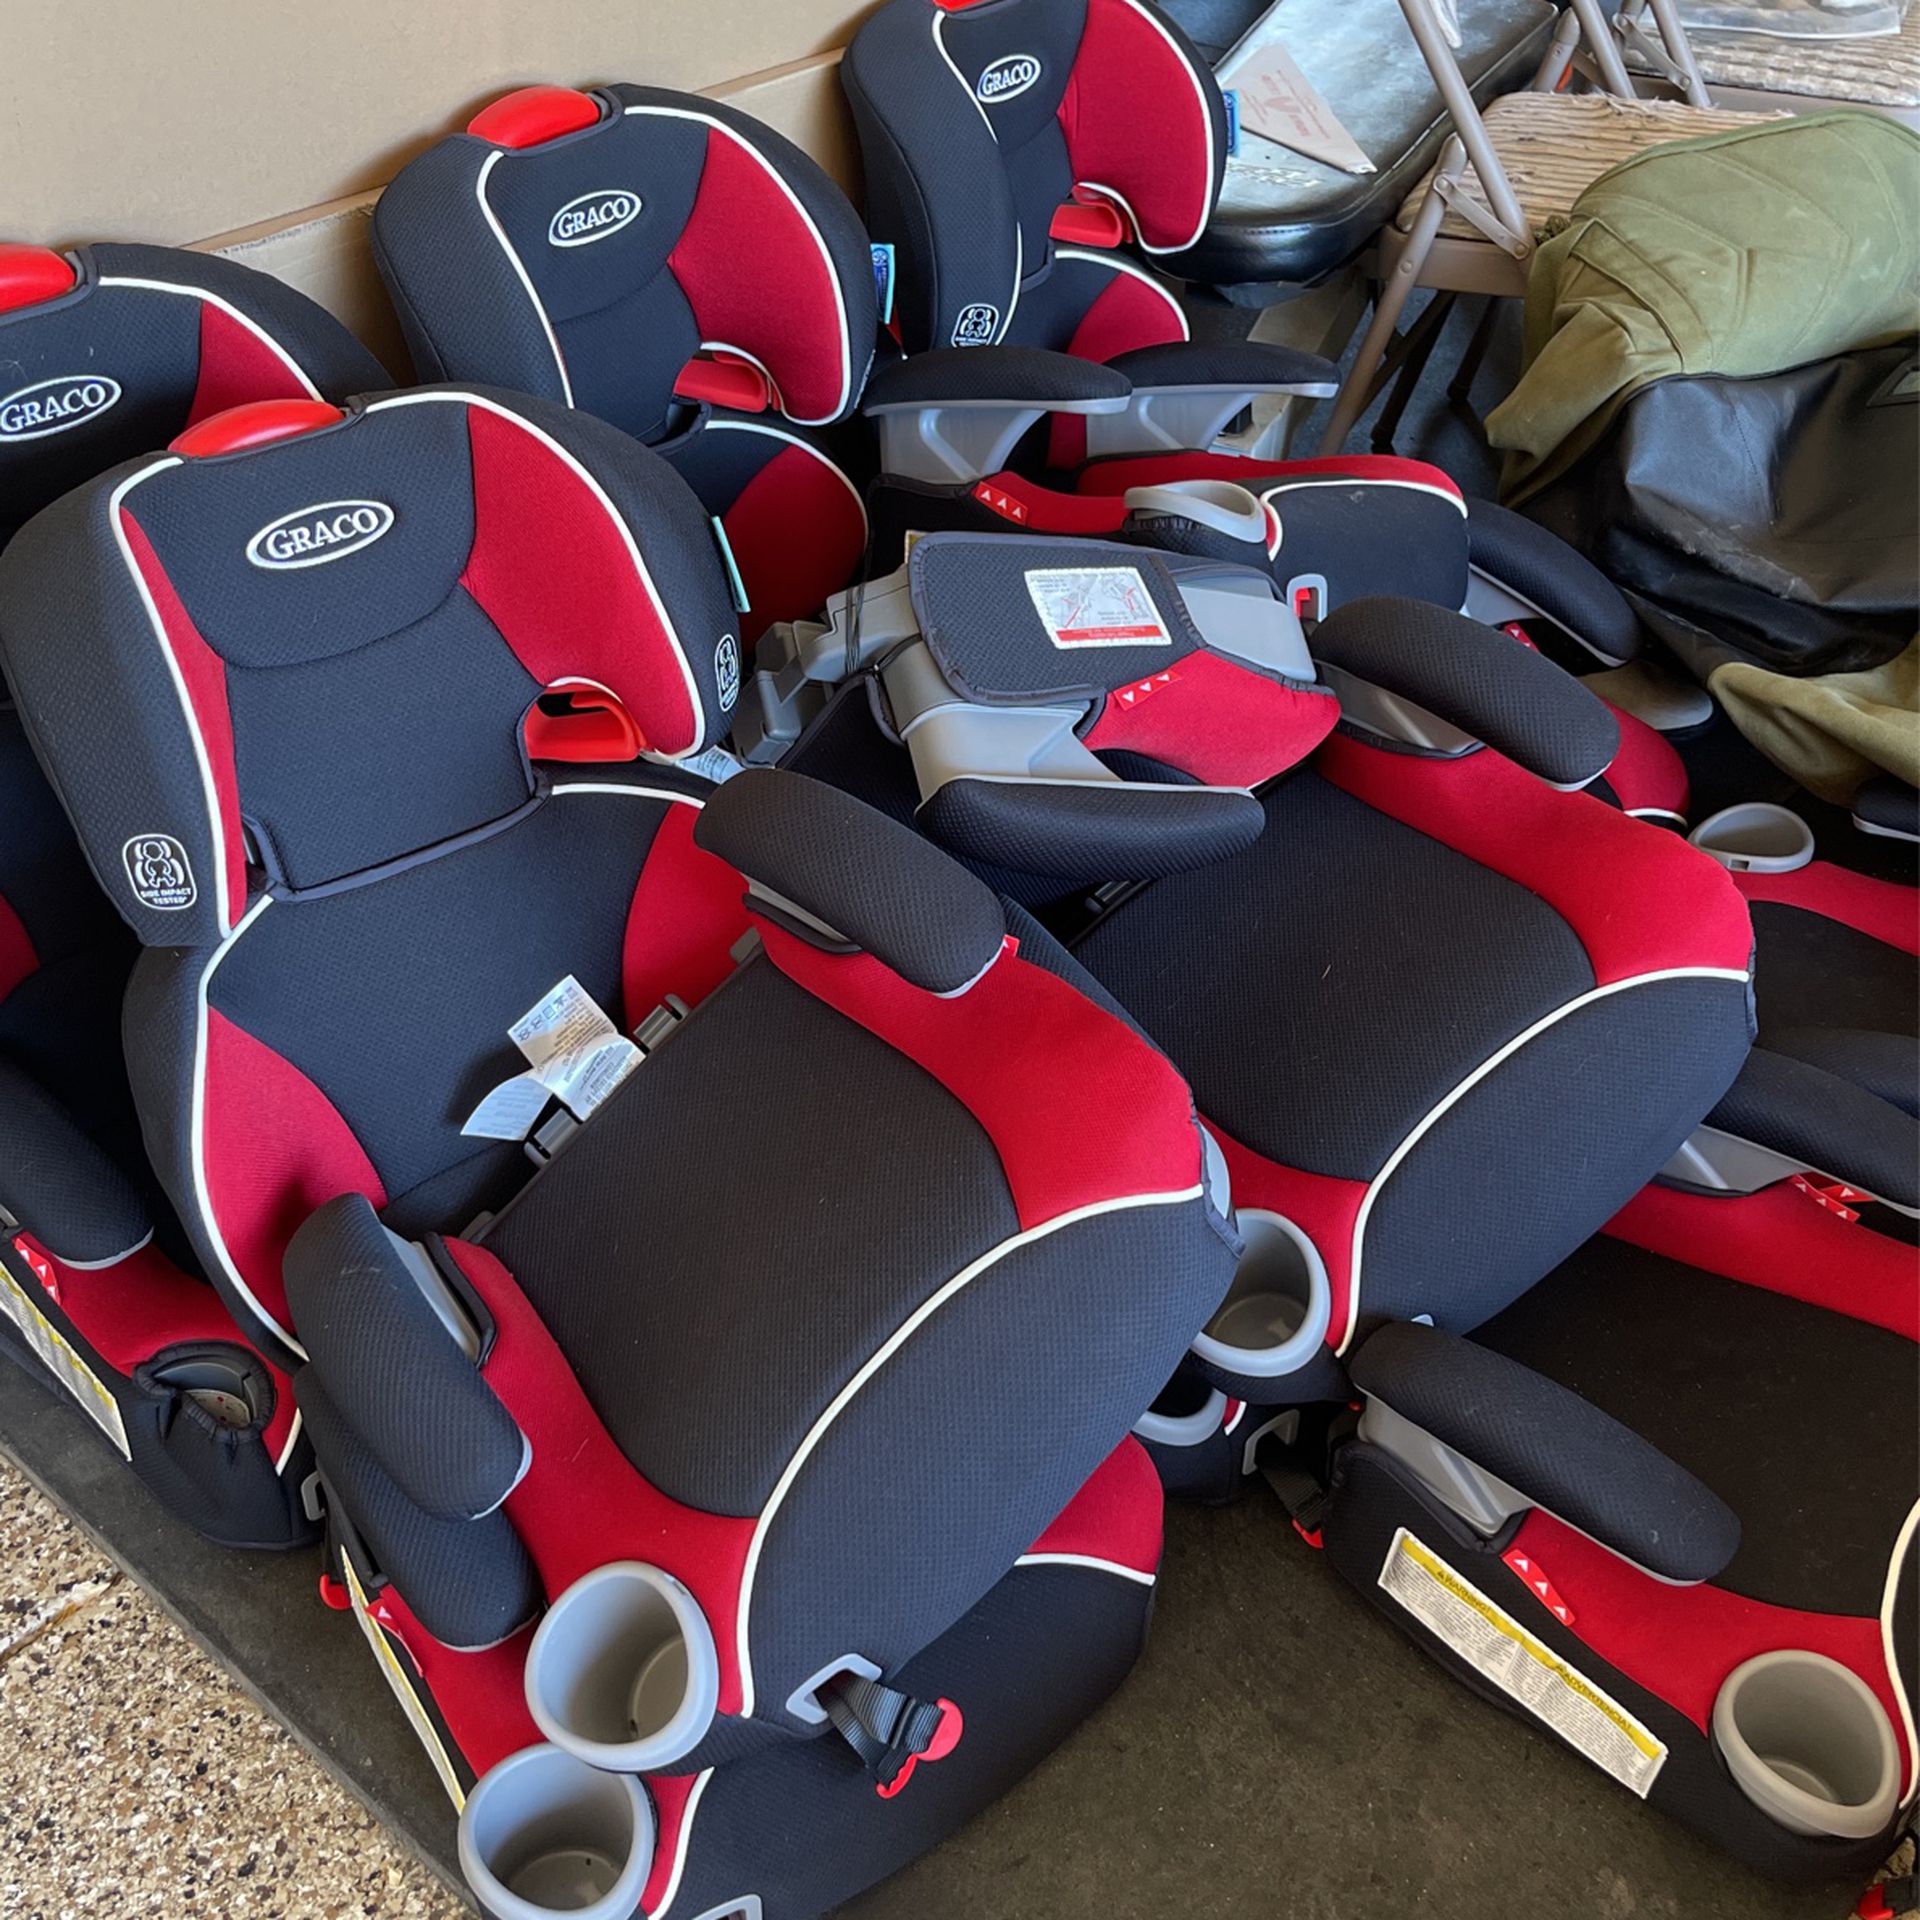 Graco Booster Seat Each $20